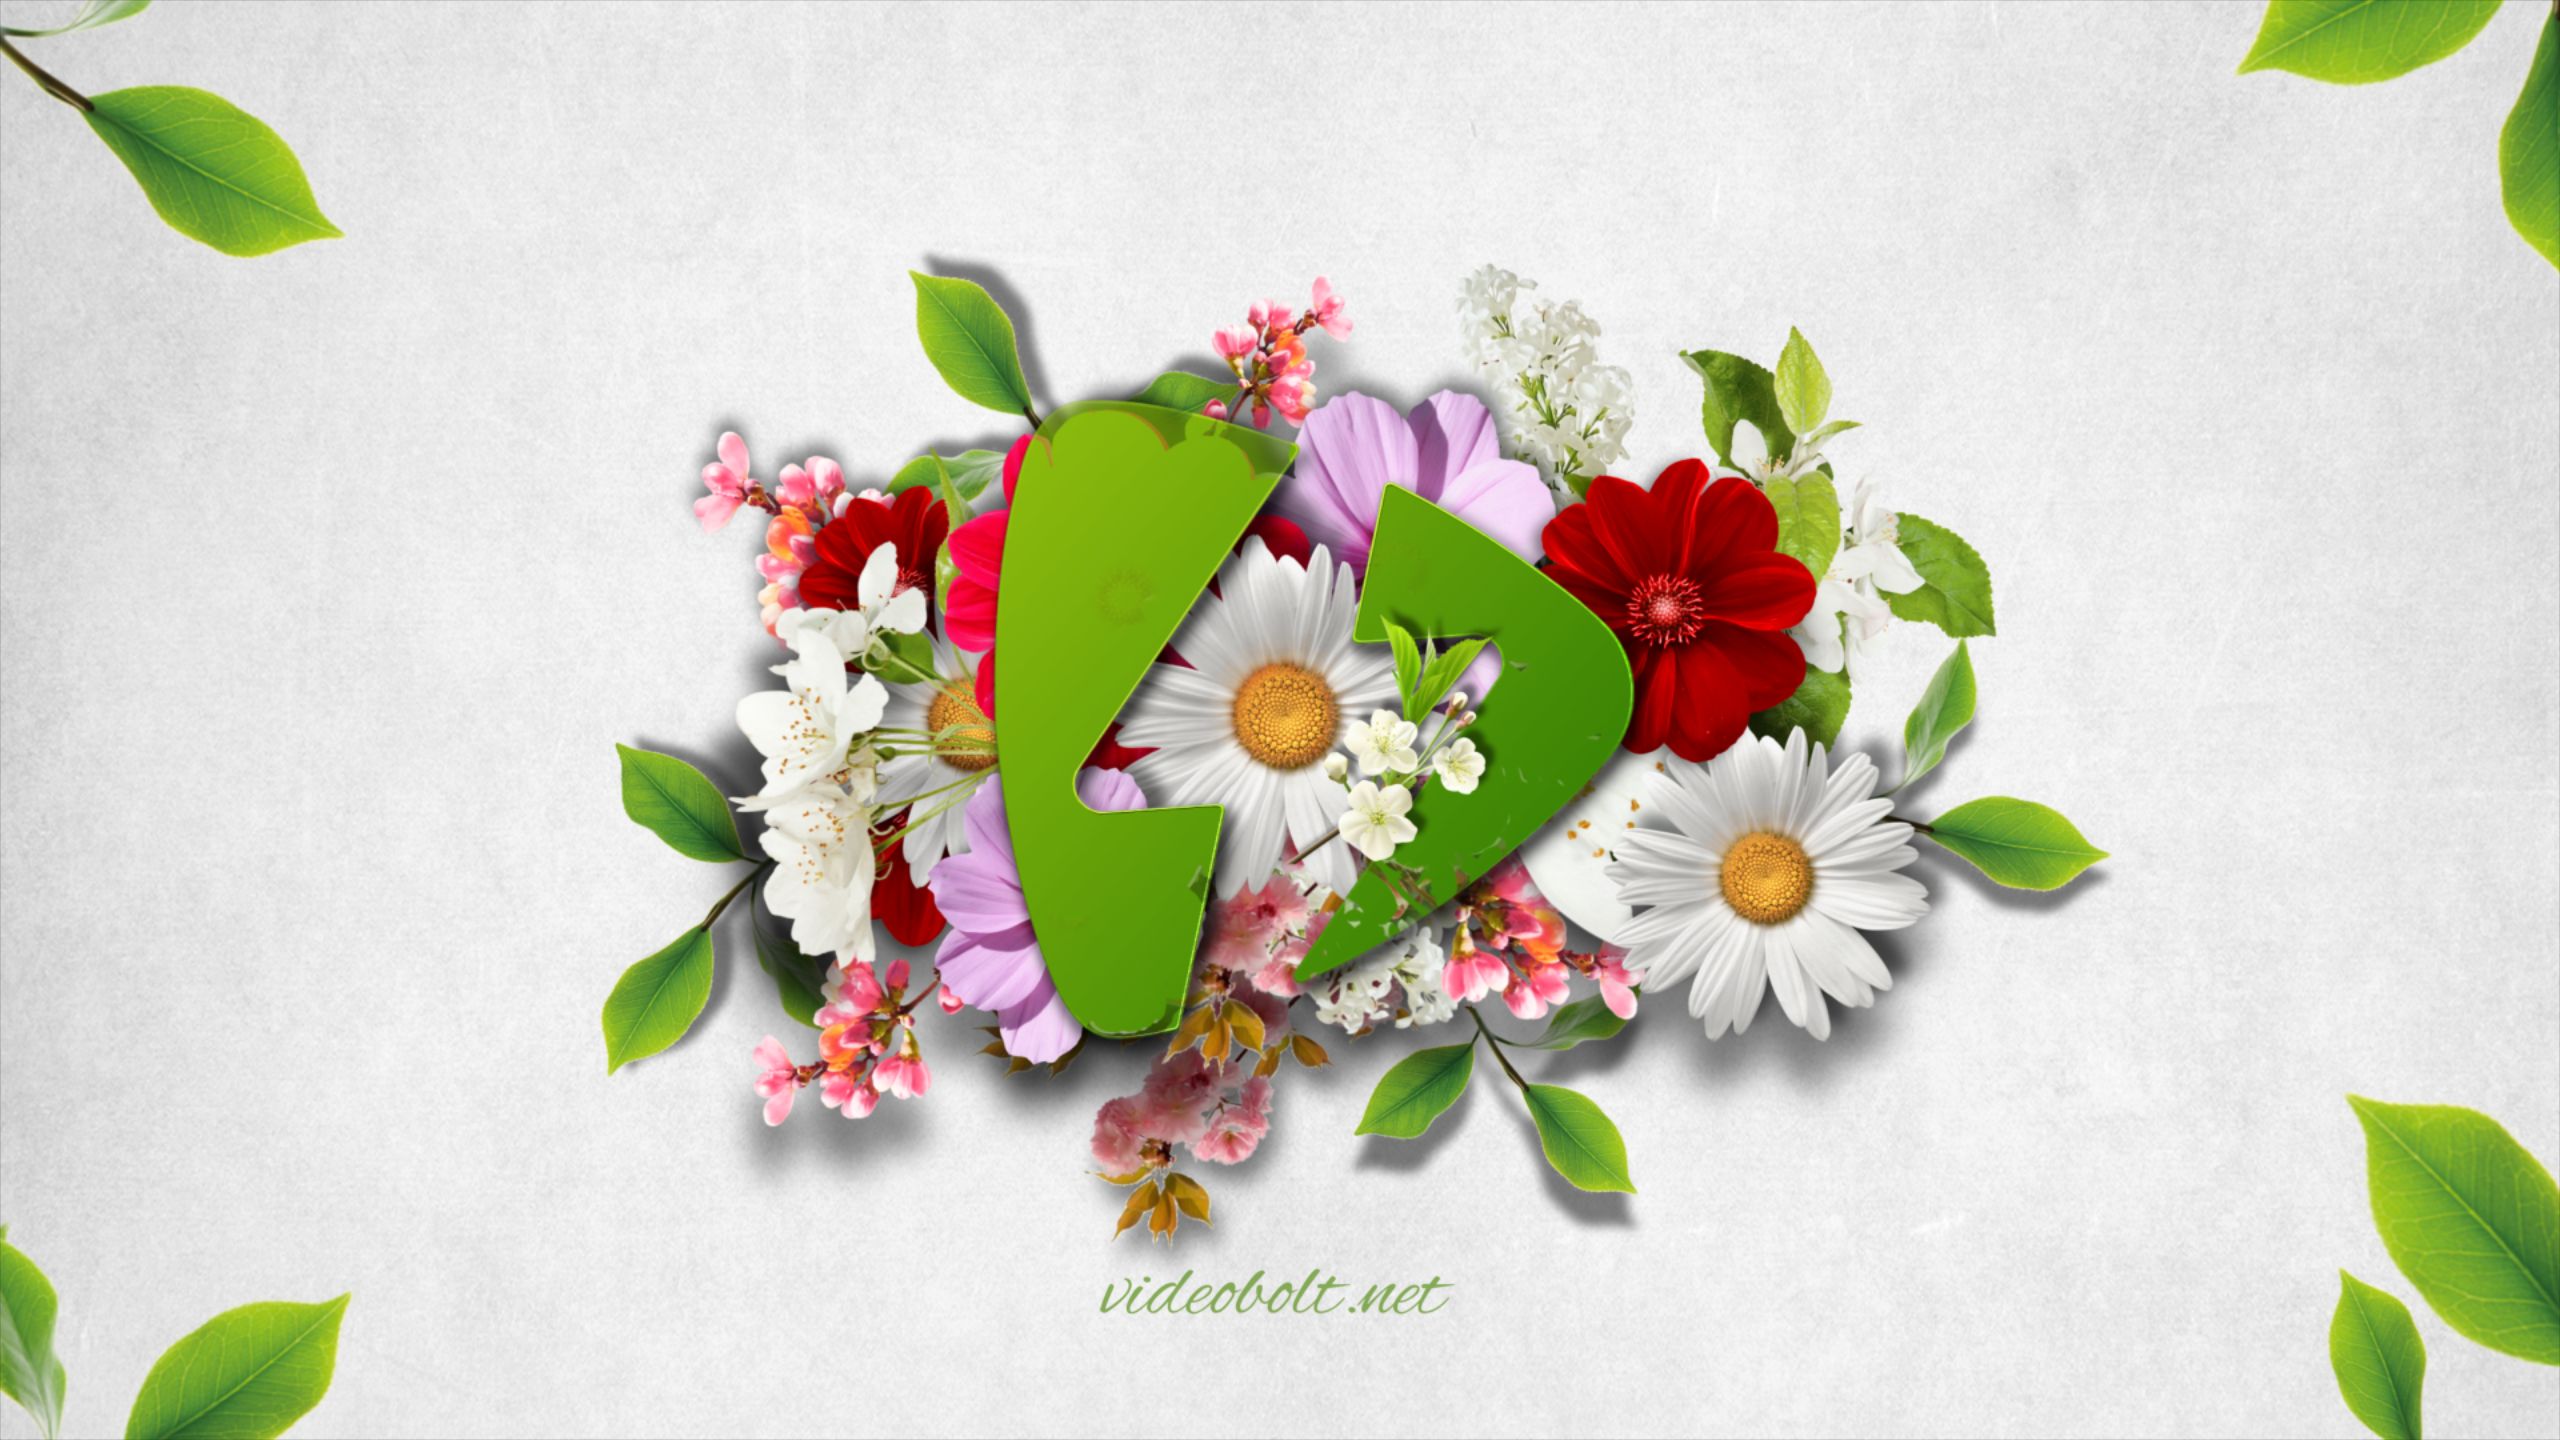 welcome animation with flowers